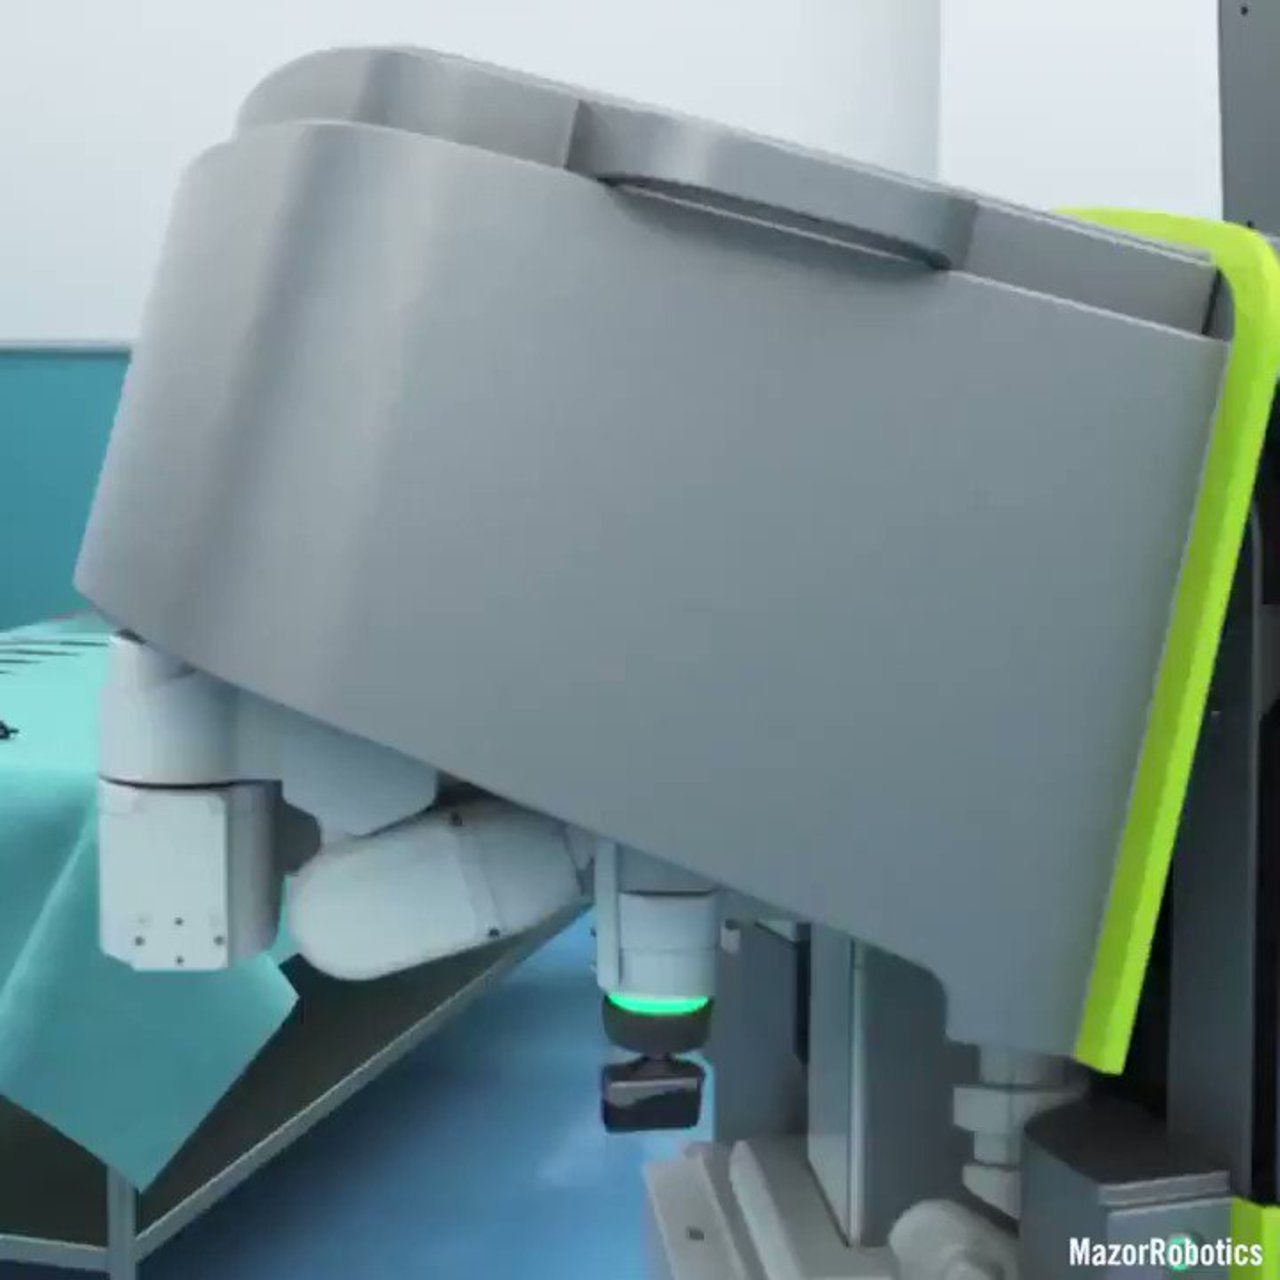 This #robotic system works with medical professionals on the operation table by @IntEngineering  #Robot #HealthTech #MedTech #Innovation #RPA #Automation #Algorithms #Tech Cc: @ianljones98 @nathealings @andy_fitze https://t.co/gAA55L9yR7